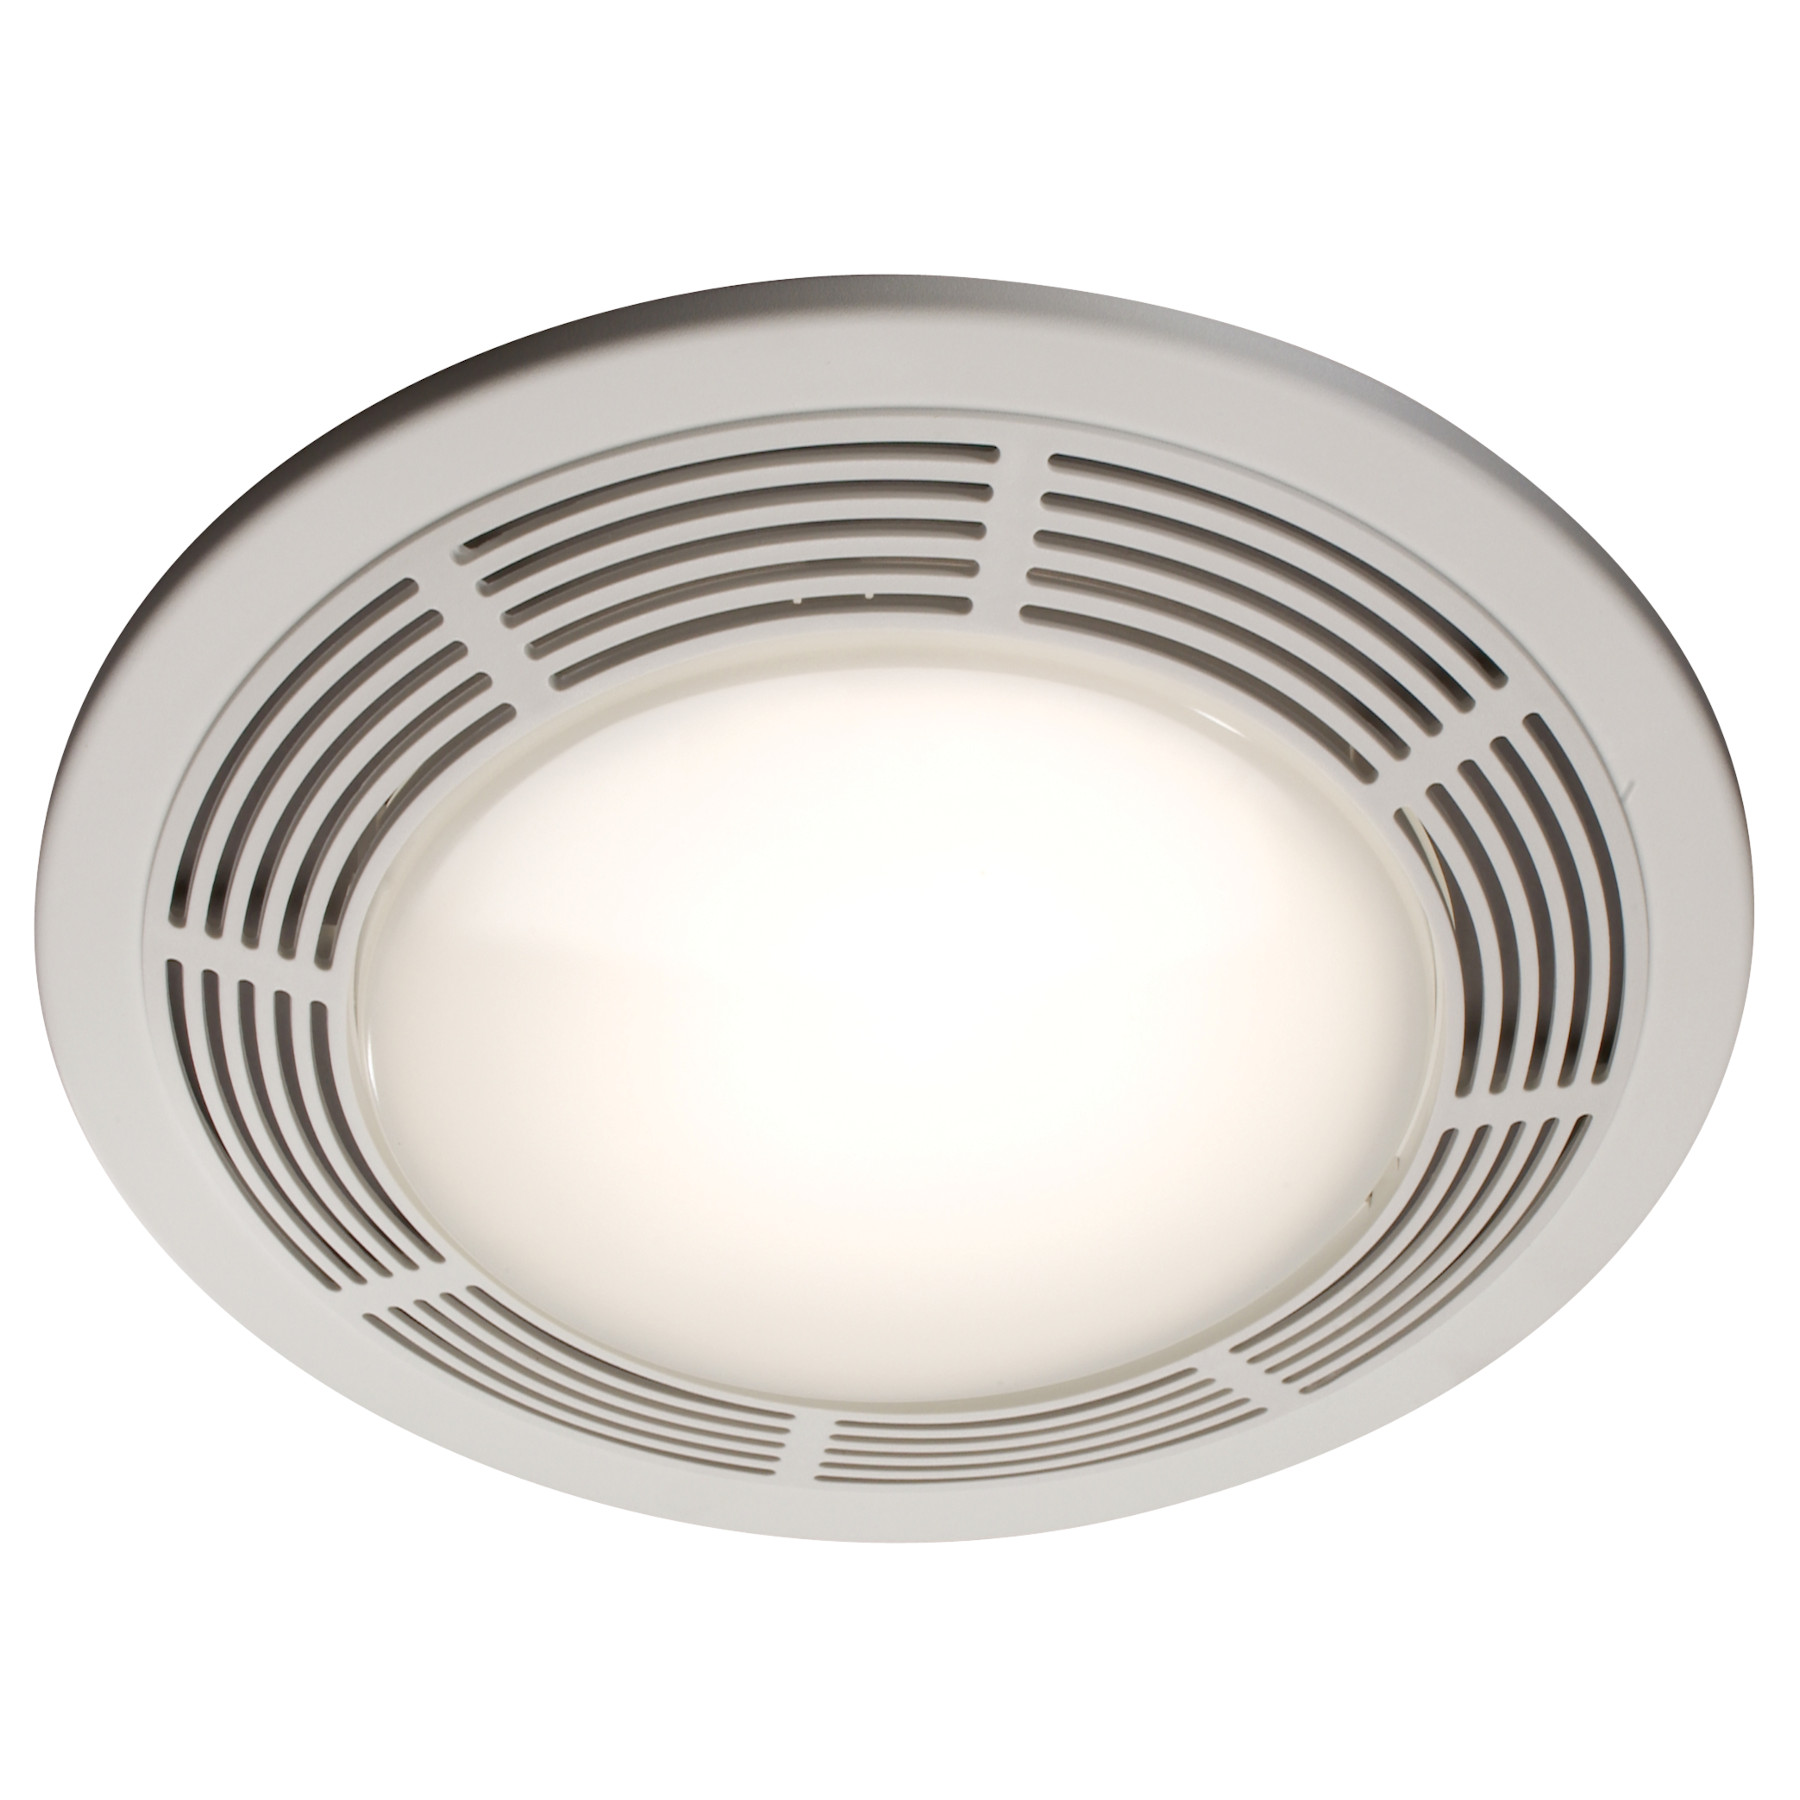 8663rp White 100 Cfm Bathroom Exhaust Fan With Light And Night Light